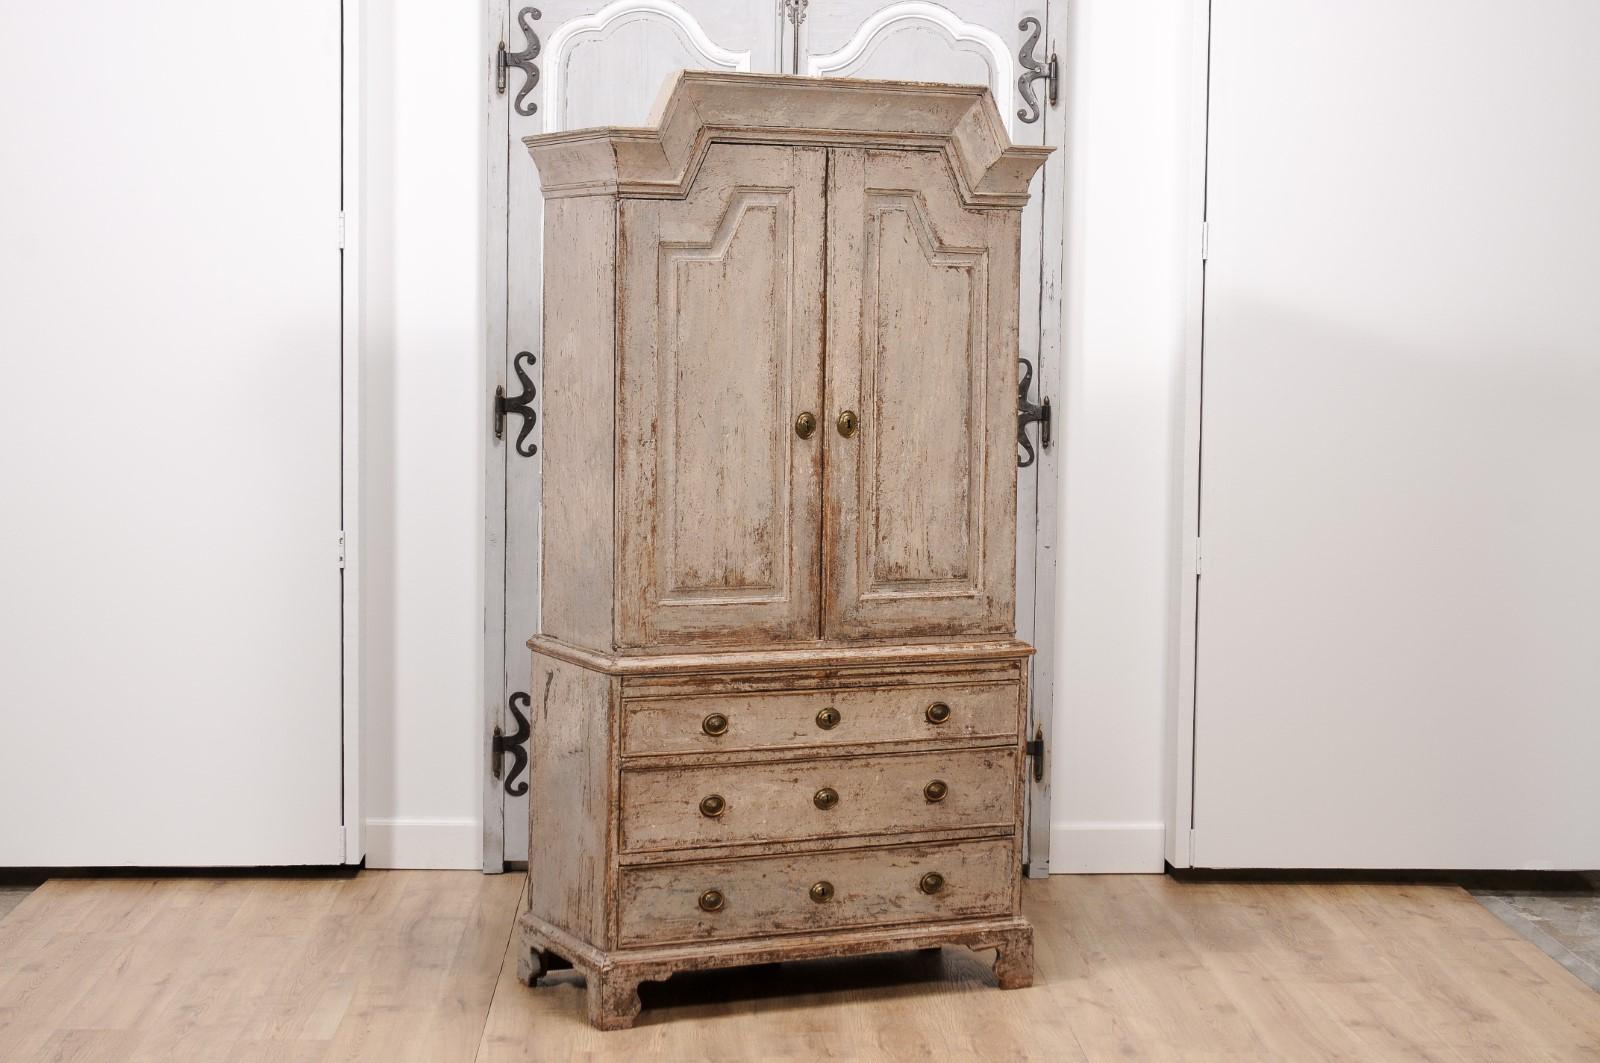 A Swedish Gustavian period painted wood cupboard from 1802 with broken pediment, two doors, three drawers, bracket feet and distressed patina. Experience the epitome of Swedish Gustavian design with this breathtaking painted wood cupboard from 1802,